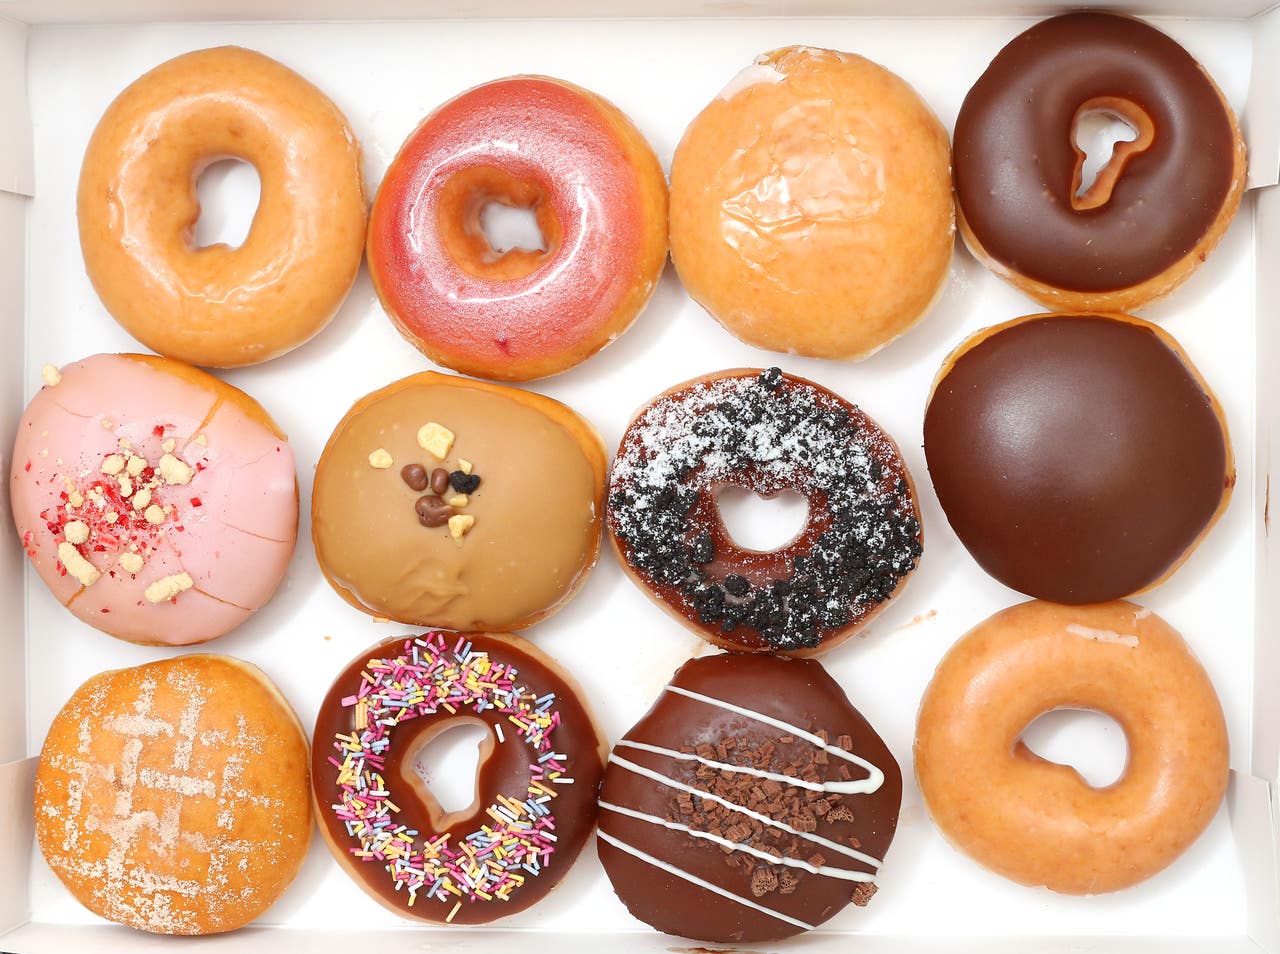 Thief asked for doughnuts as well as money in Krispy Kreme robbery.